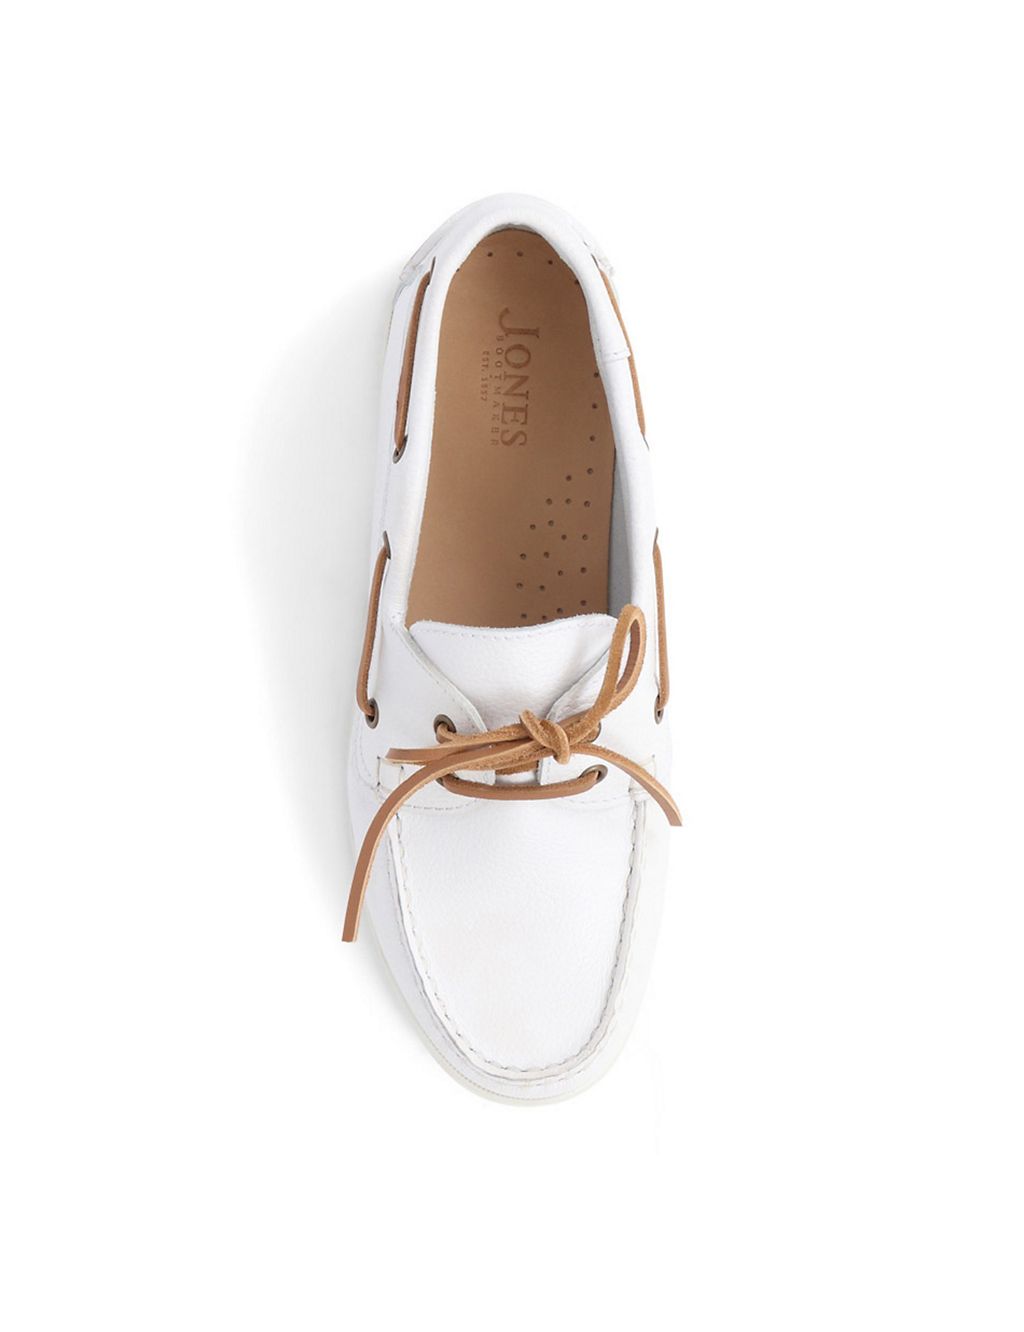 Leather Lace Up Flat Boat Shoes 7 of 7